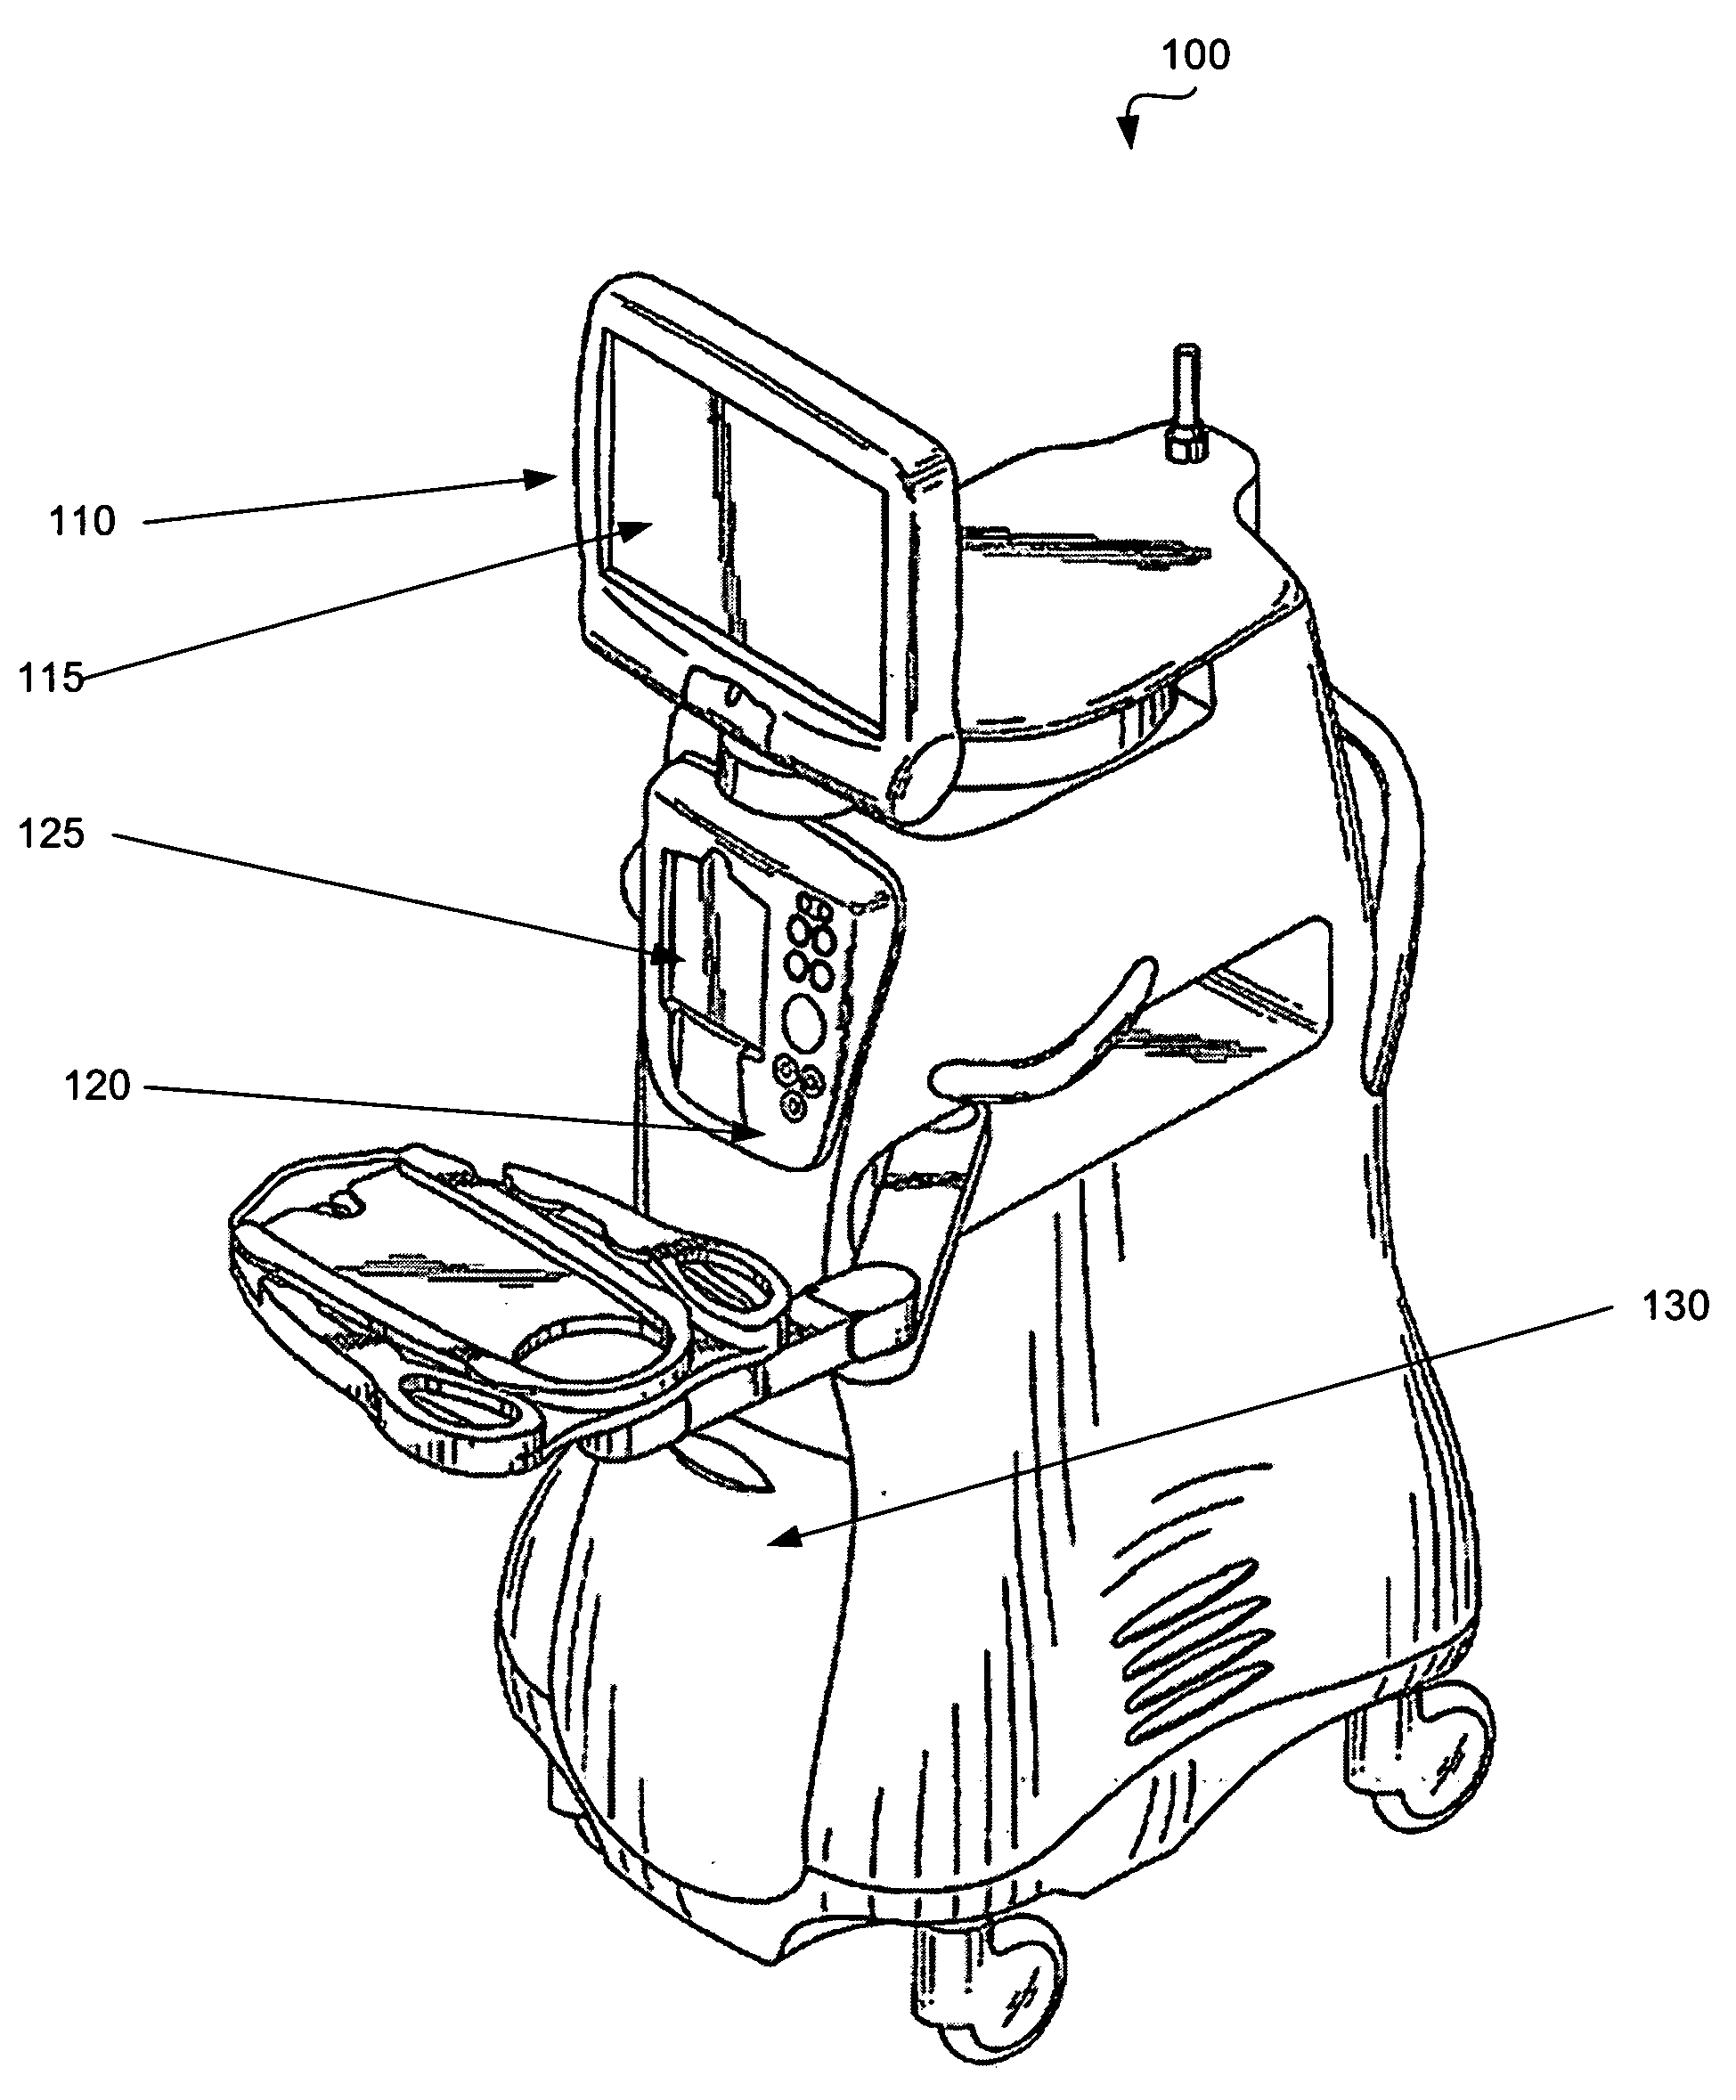 System and method for the modification of surgical procedures using a graphical drag and drop interface